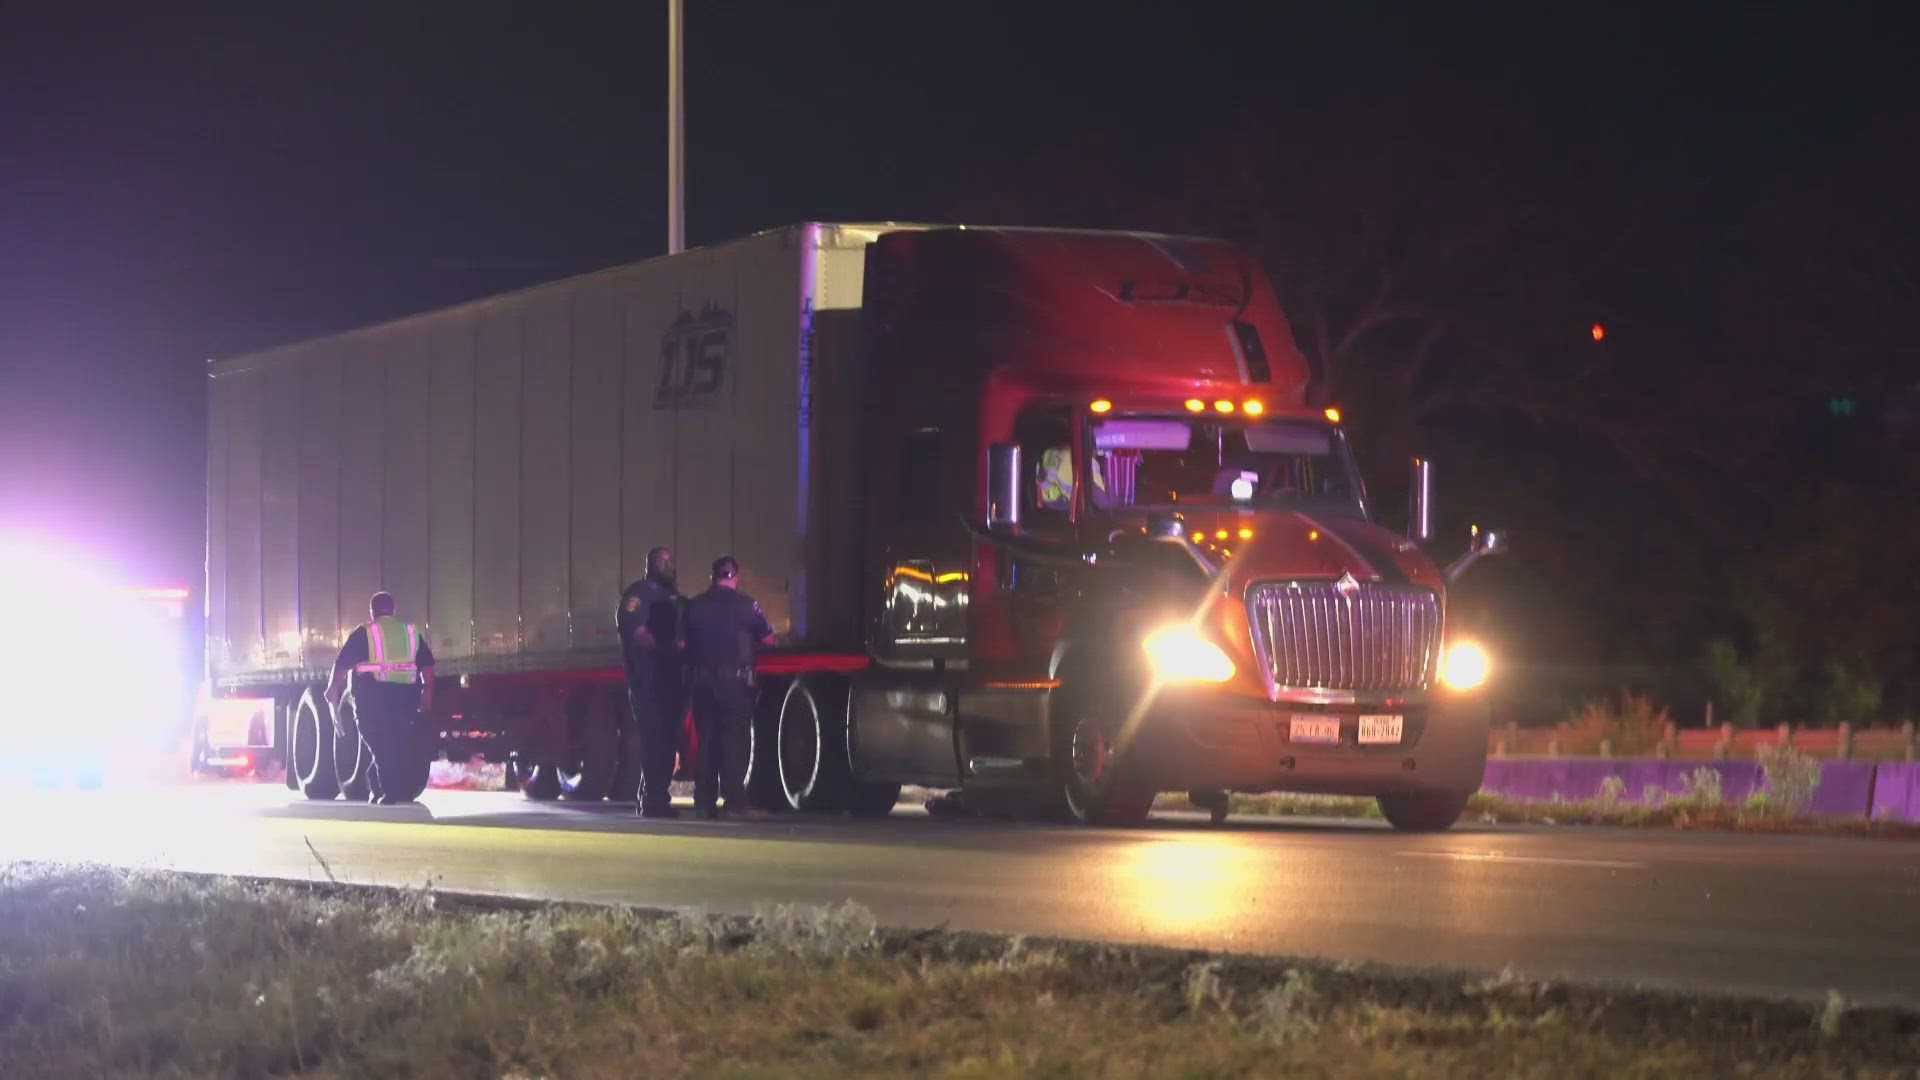 The driver of that big rig is now facing some serious questions from police.